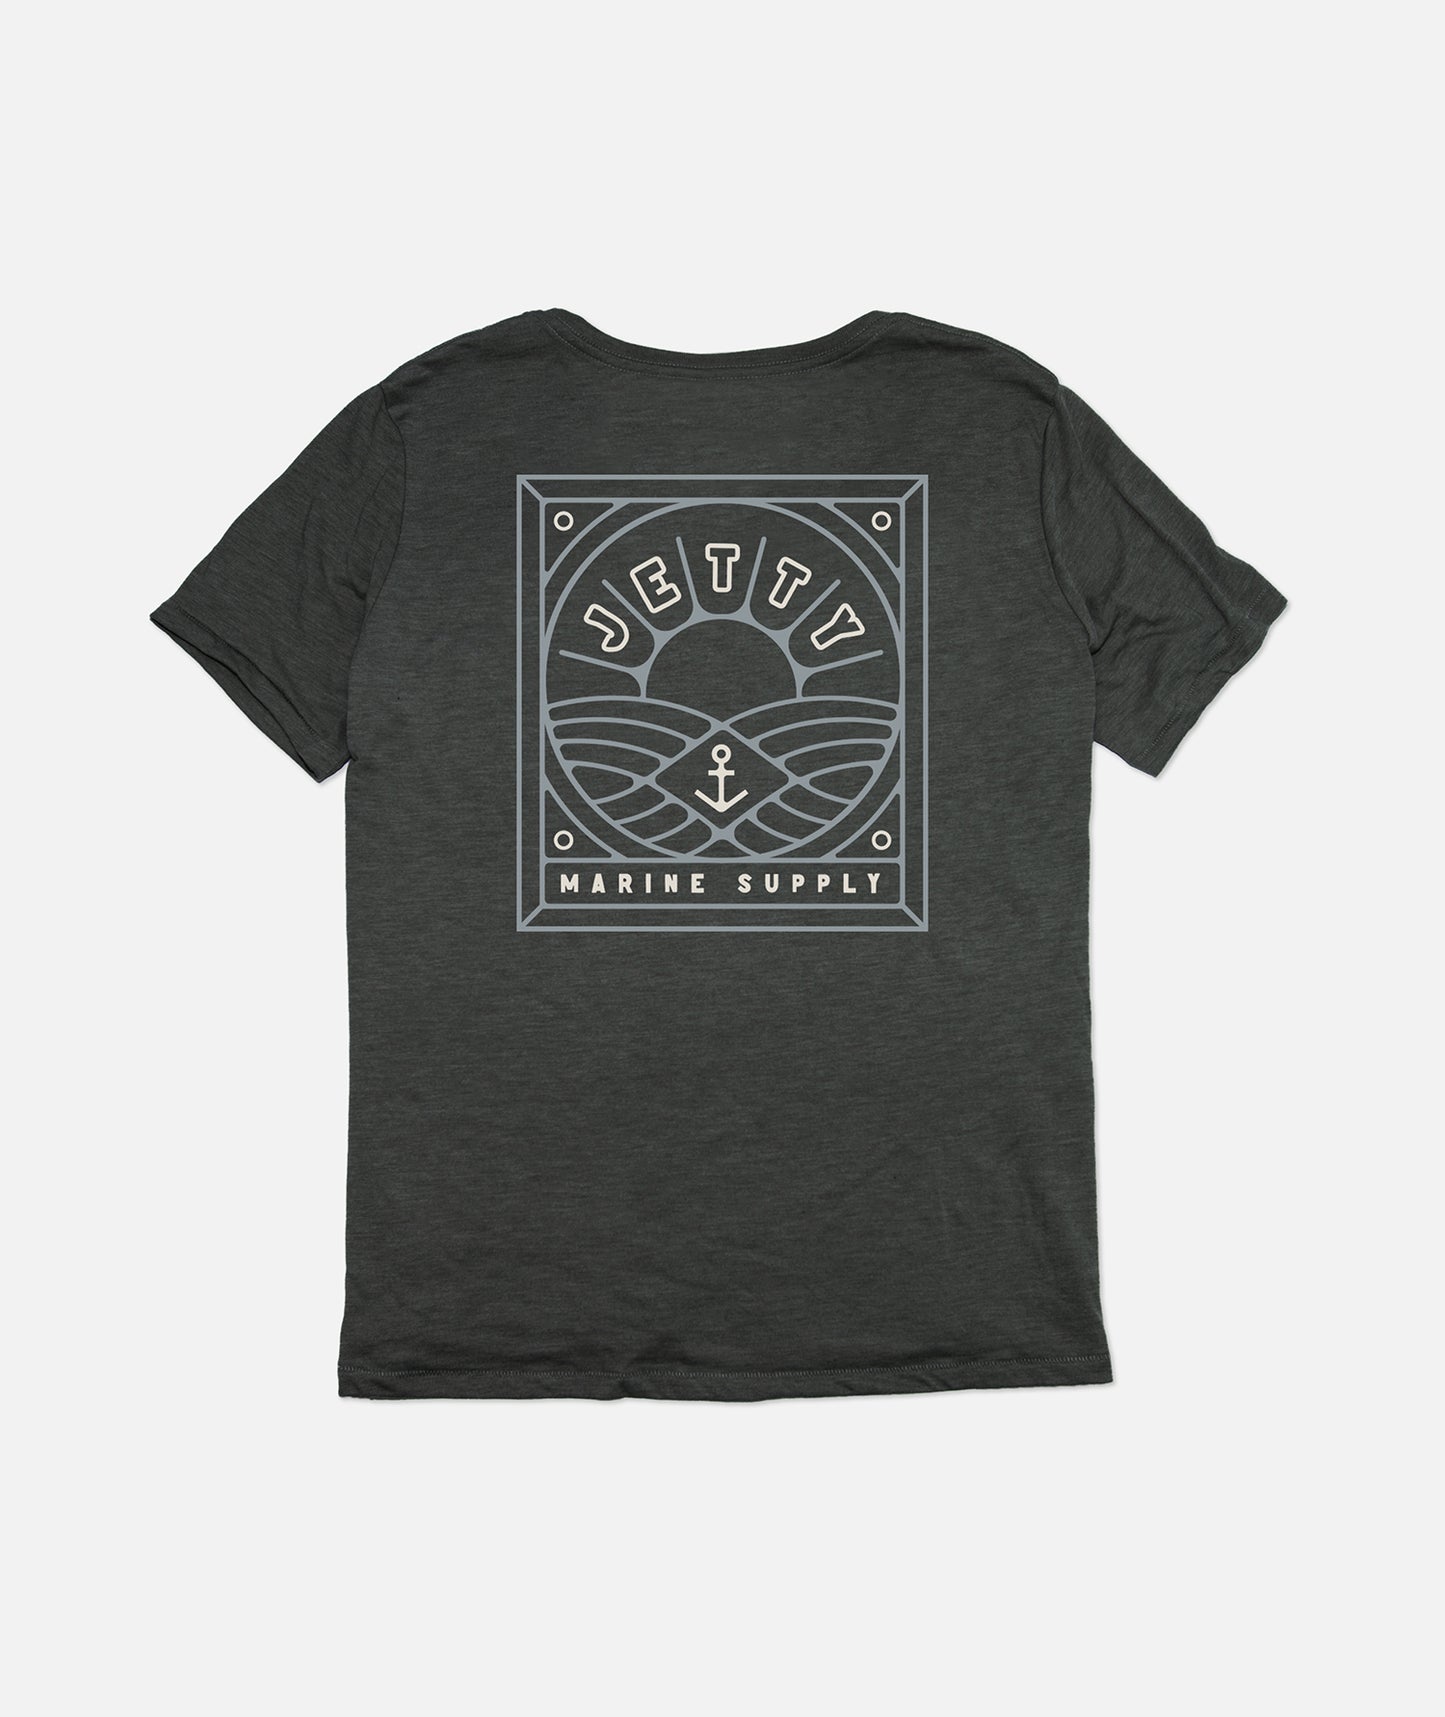 Eventide Pocket Tee - Charcoal